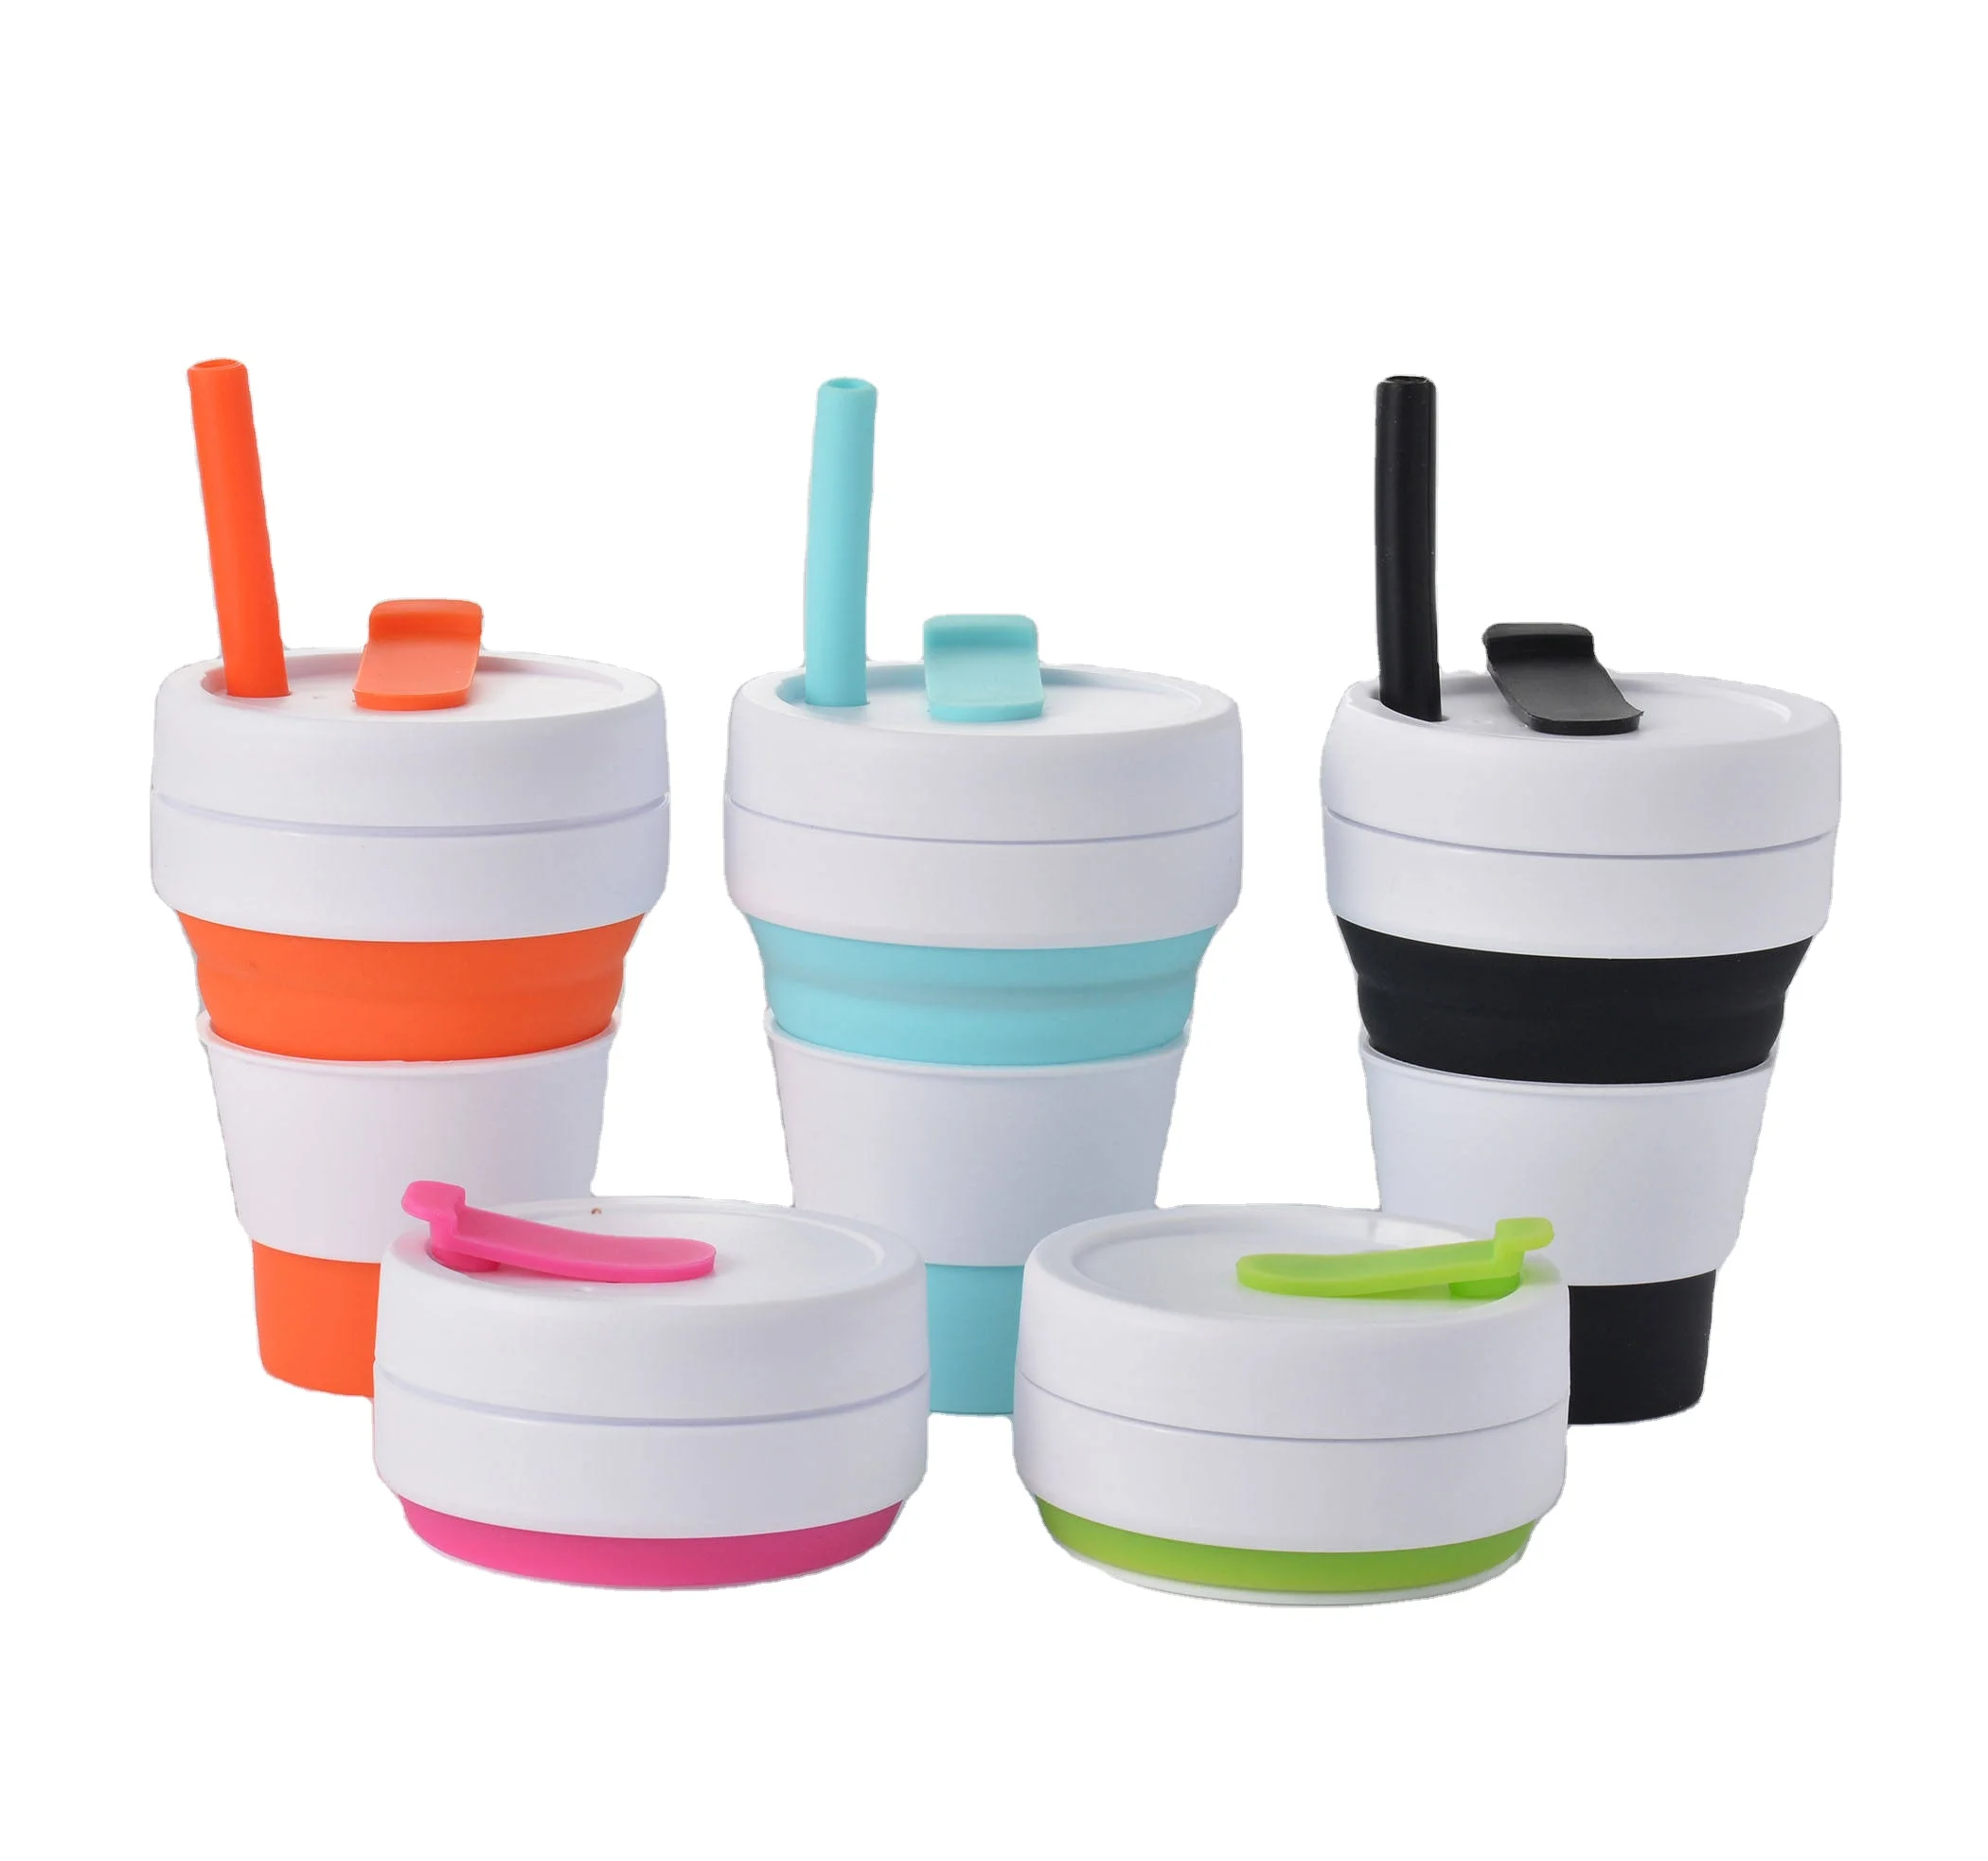 

Factory Hot Selling Bpa Free Silicone Cup Eco-Friendly Foldable Collapsible 350ml Travel Drinking Cup With Straw